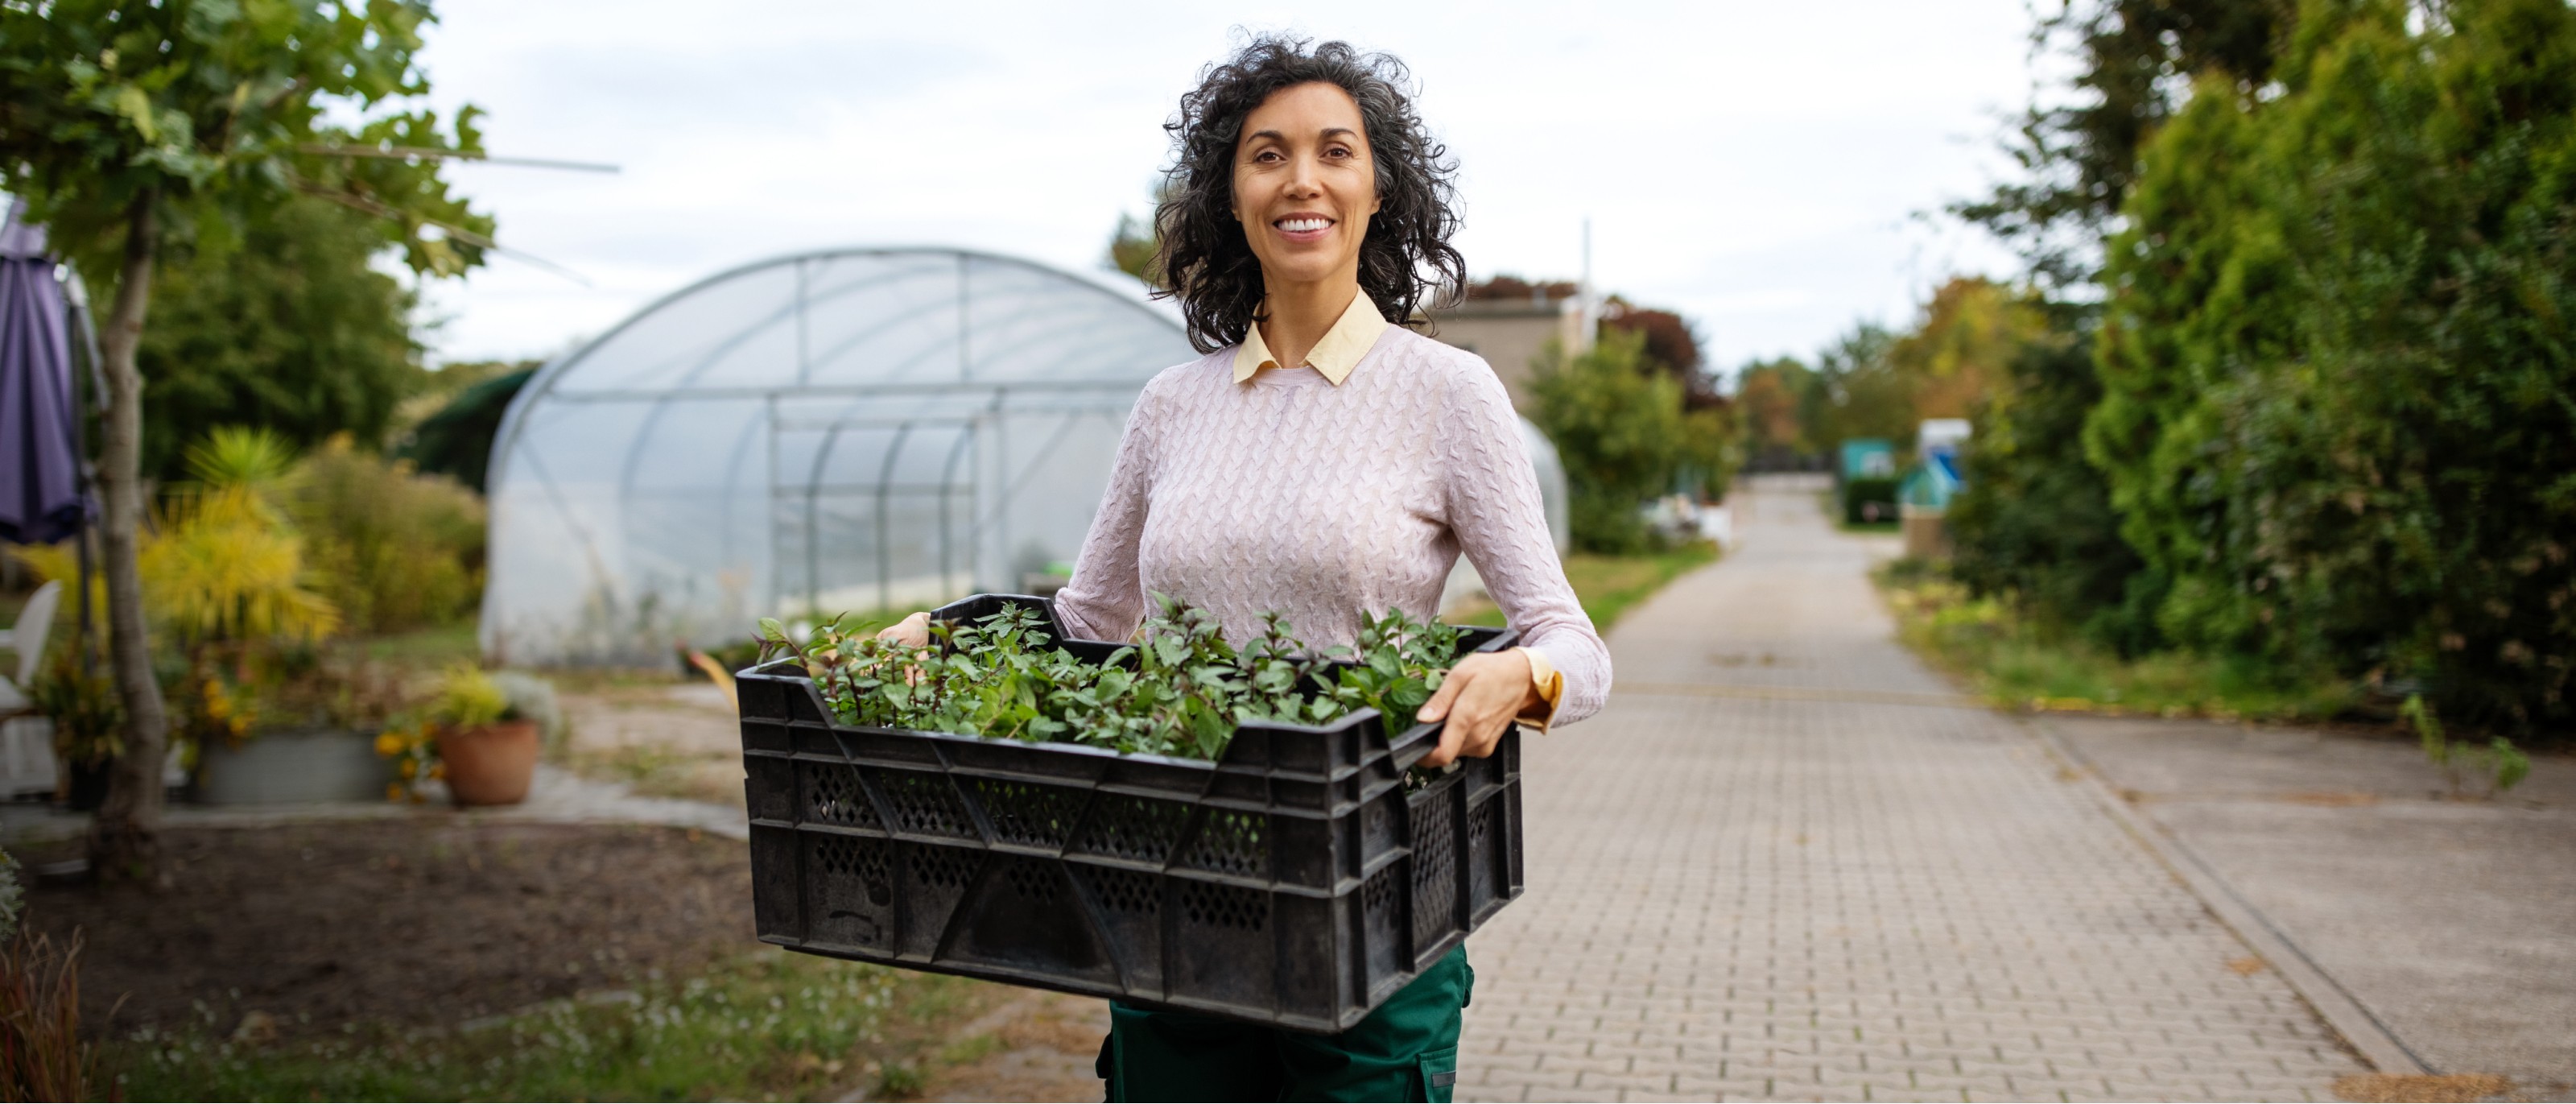 Woman smiling standing in front of greenhouse holding case of fresh plants